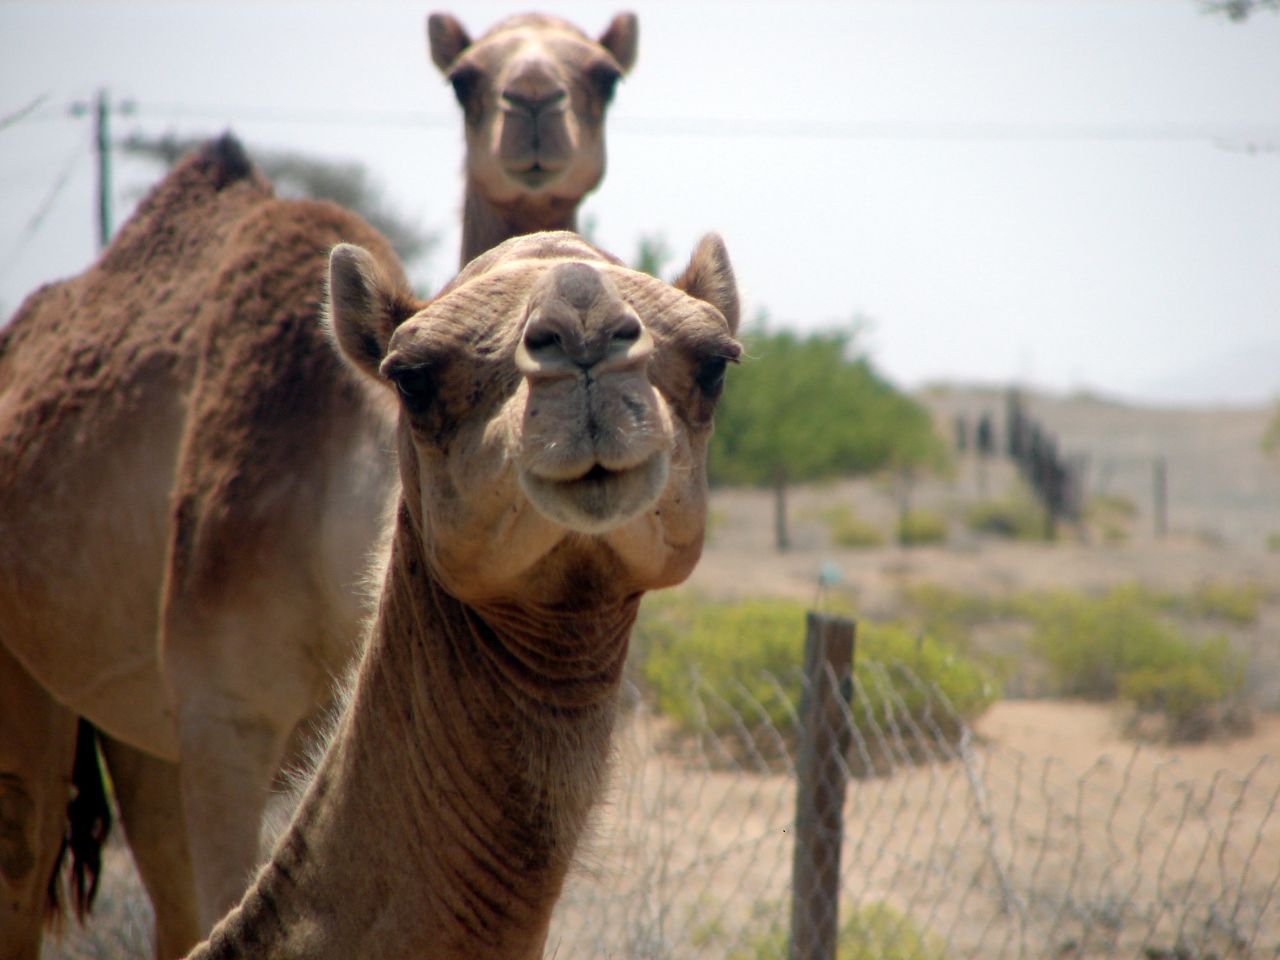 camels in a fenced area looking directly at the camera